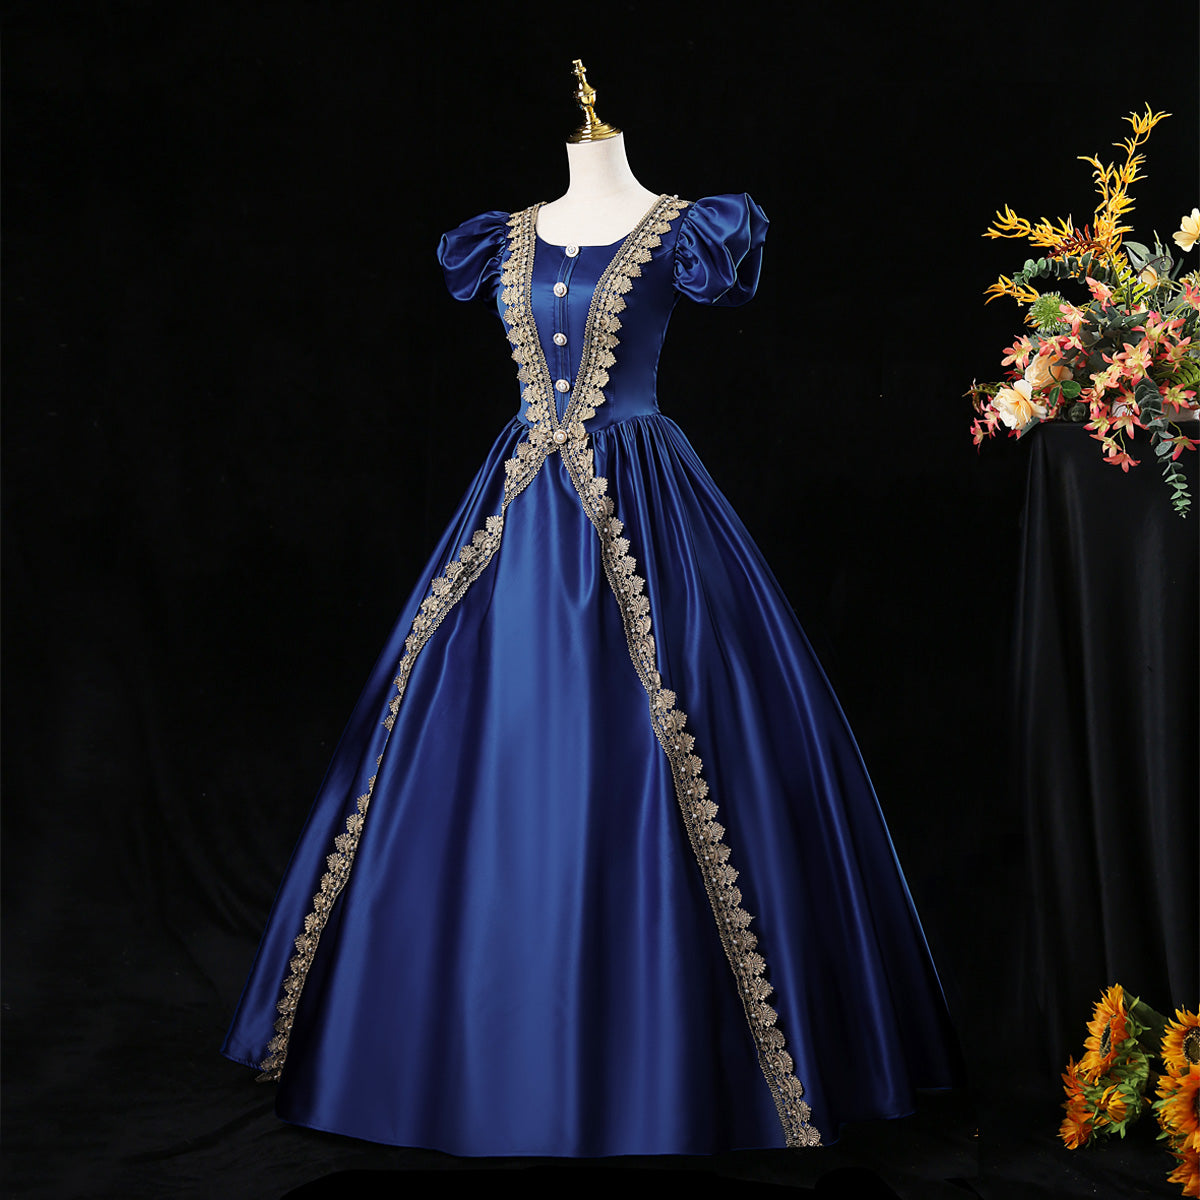 Victorian Christmas Holiday Gown Royal Queen Floral Princess Dress Theater Costume